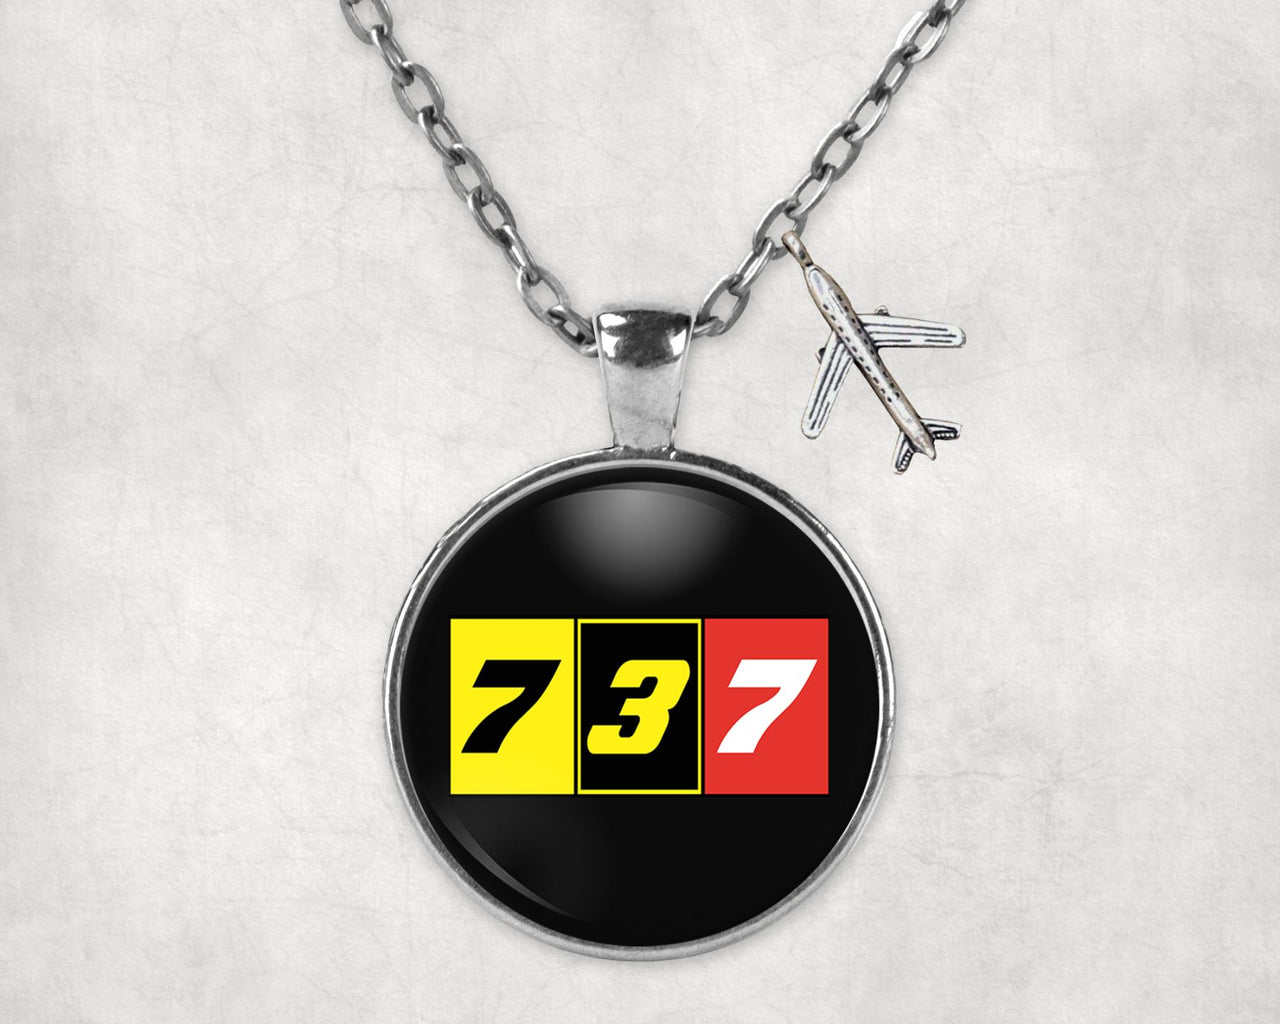 Flat Colourful 737 Designed Necklaces